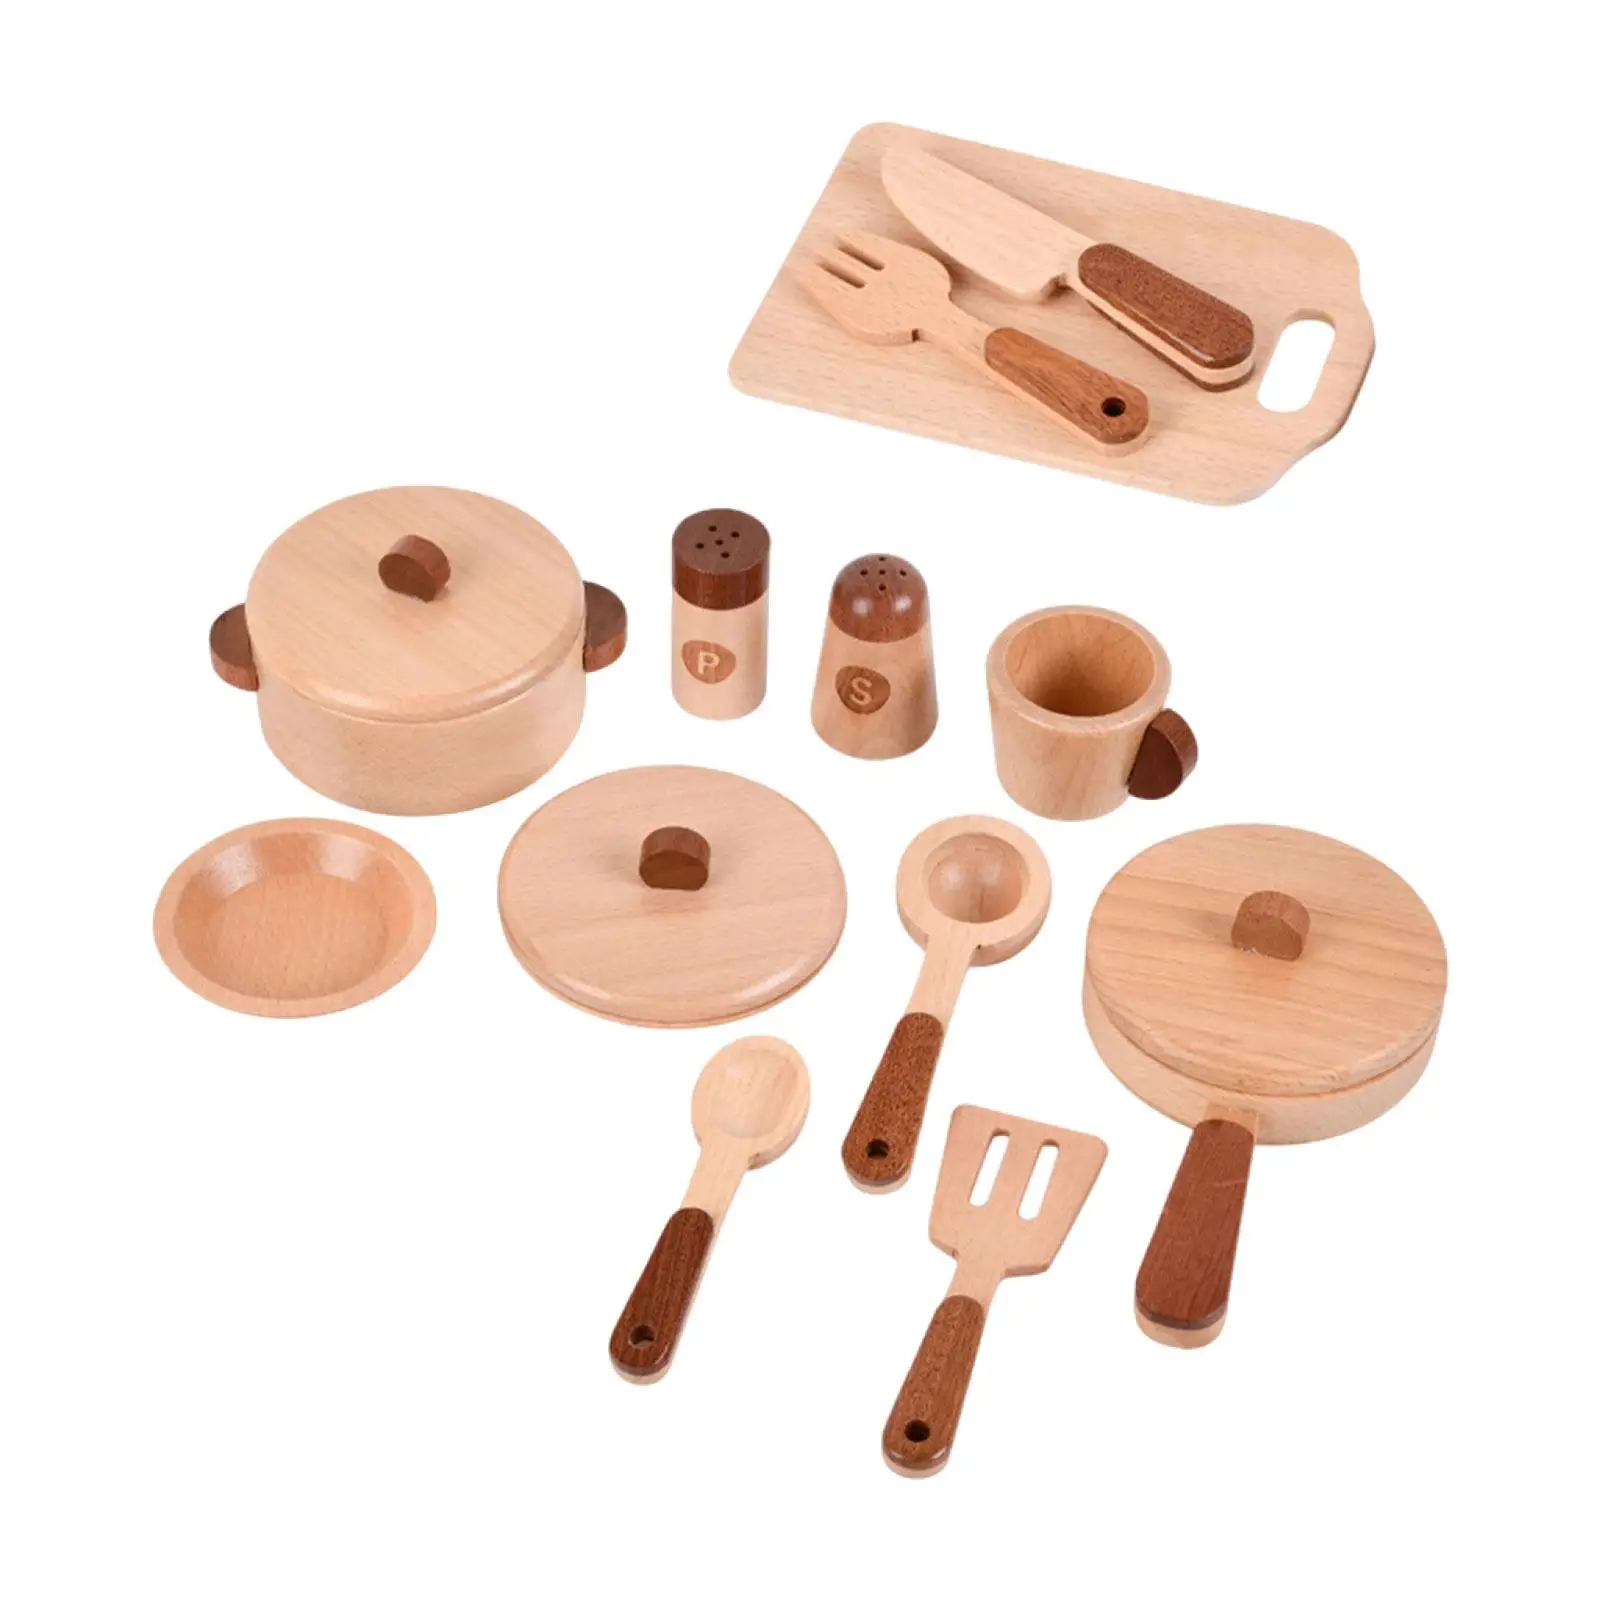 

Pretend Play Toy Education Basic Skills Development Early Learning Fun Montessori Wooden Play Cooking Set for Kids Girls Gift